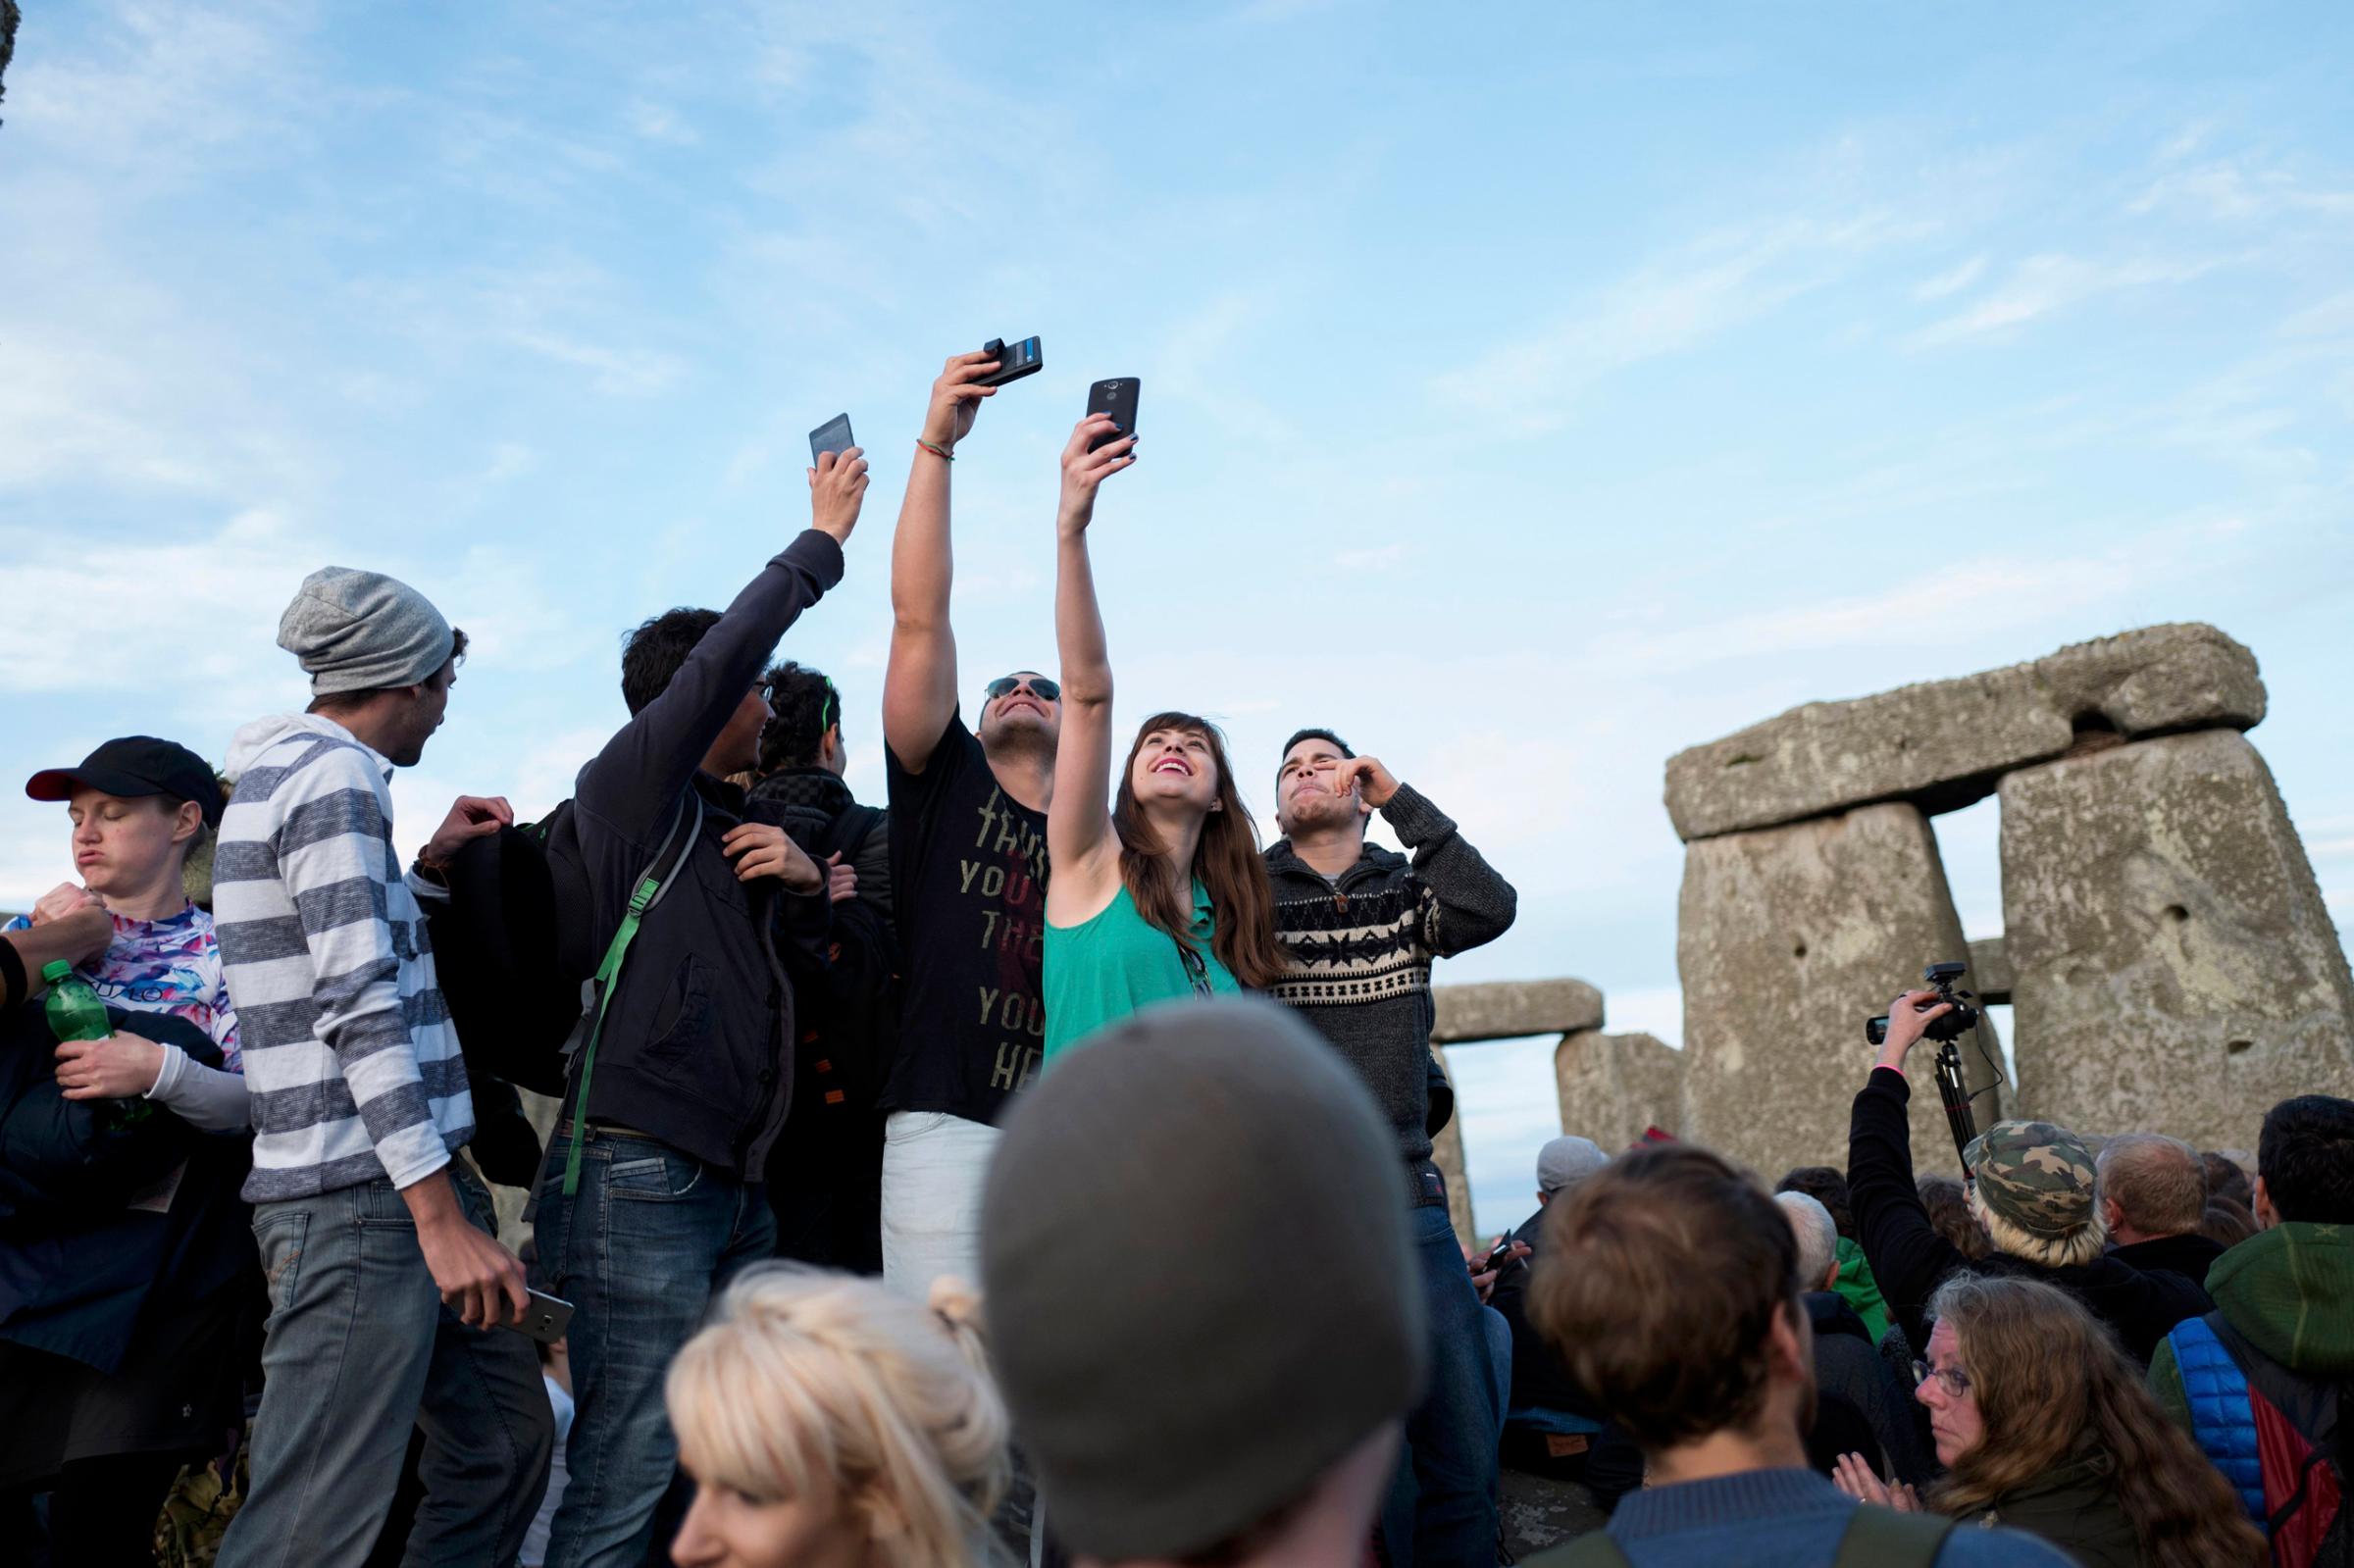 Revellers celebrate the longest day of the year at Stonehenge on Salisbury Plain in southern England, June 20, 2016.